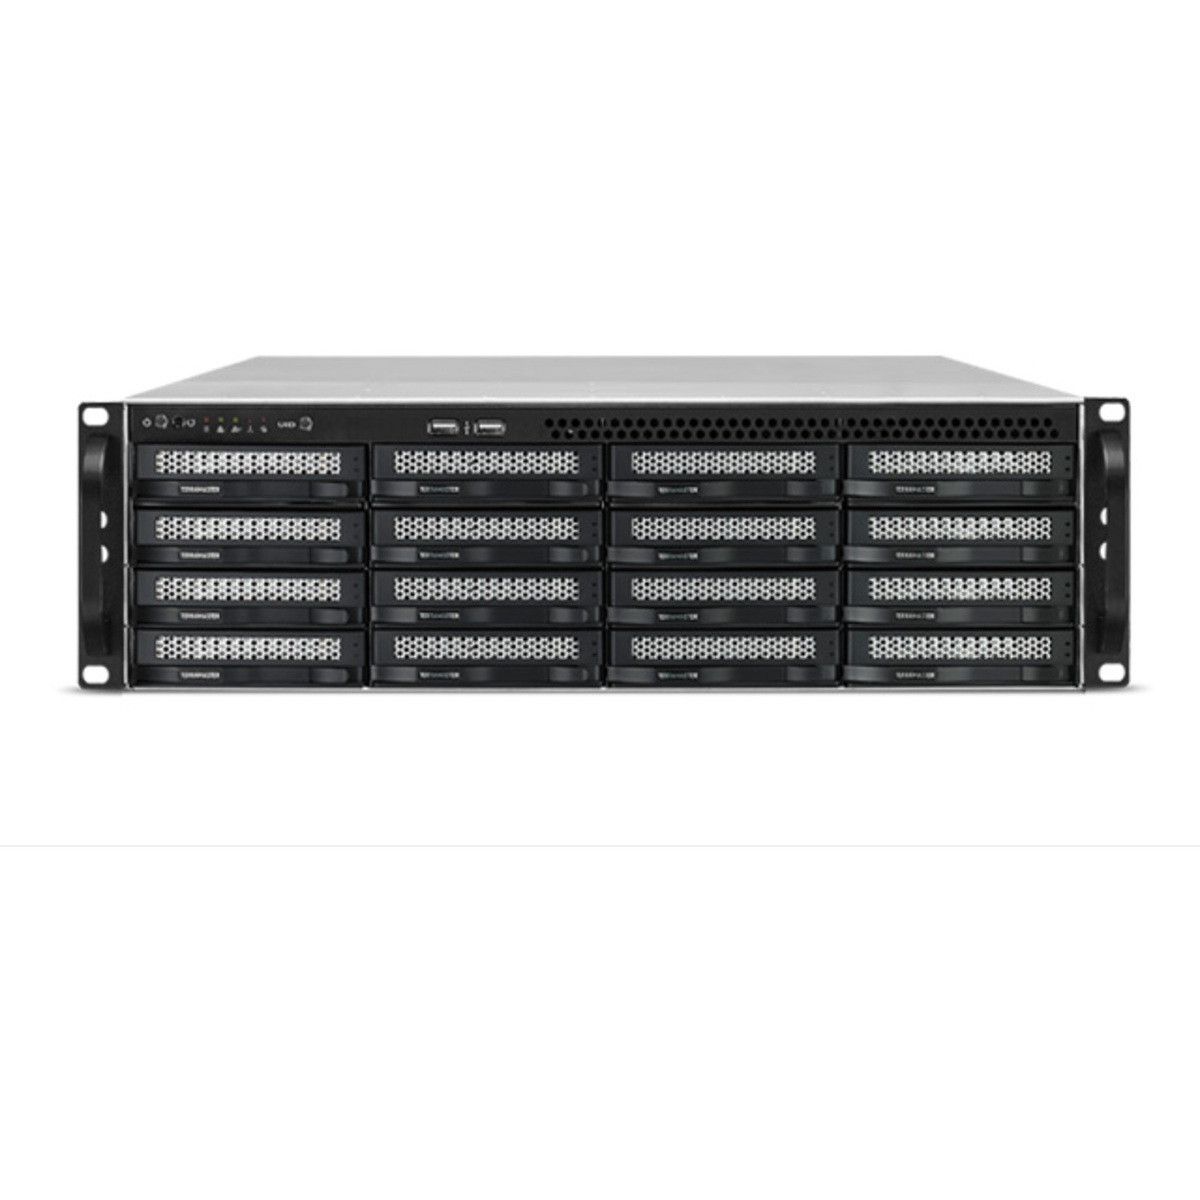 TerraMaster U16-722-2224 208tb 16-Bay RackMount Large Business / Enterprise NAS - Network Attached Storage Device 13x16tb Seagate IronWolf ST16000VN001 3.5 7200rpm SATA 6Gb/s HDD NAS Class Drives Installed - Burn-In Tested U16-722-2224